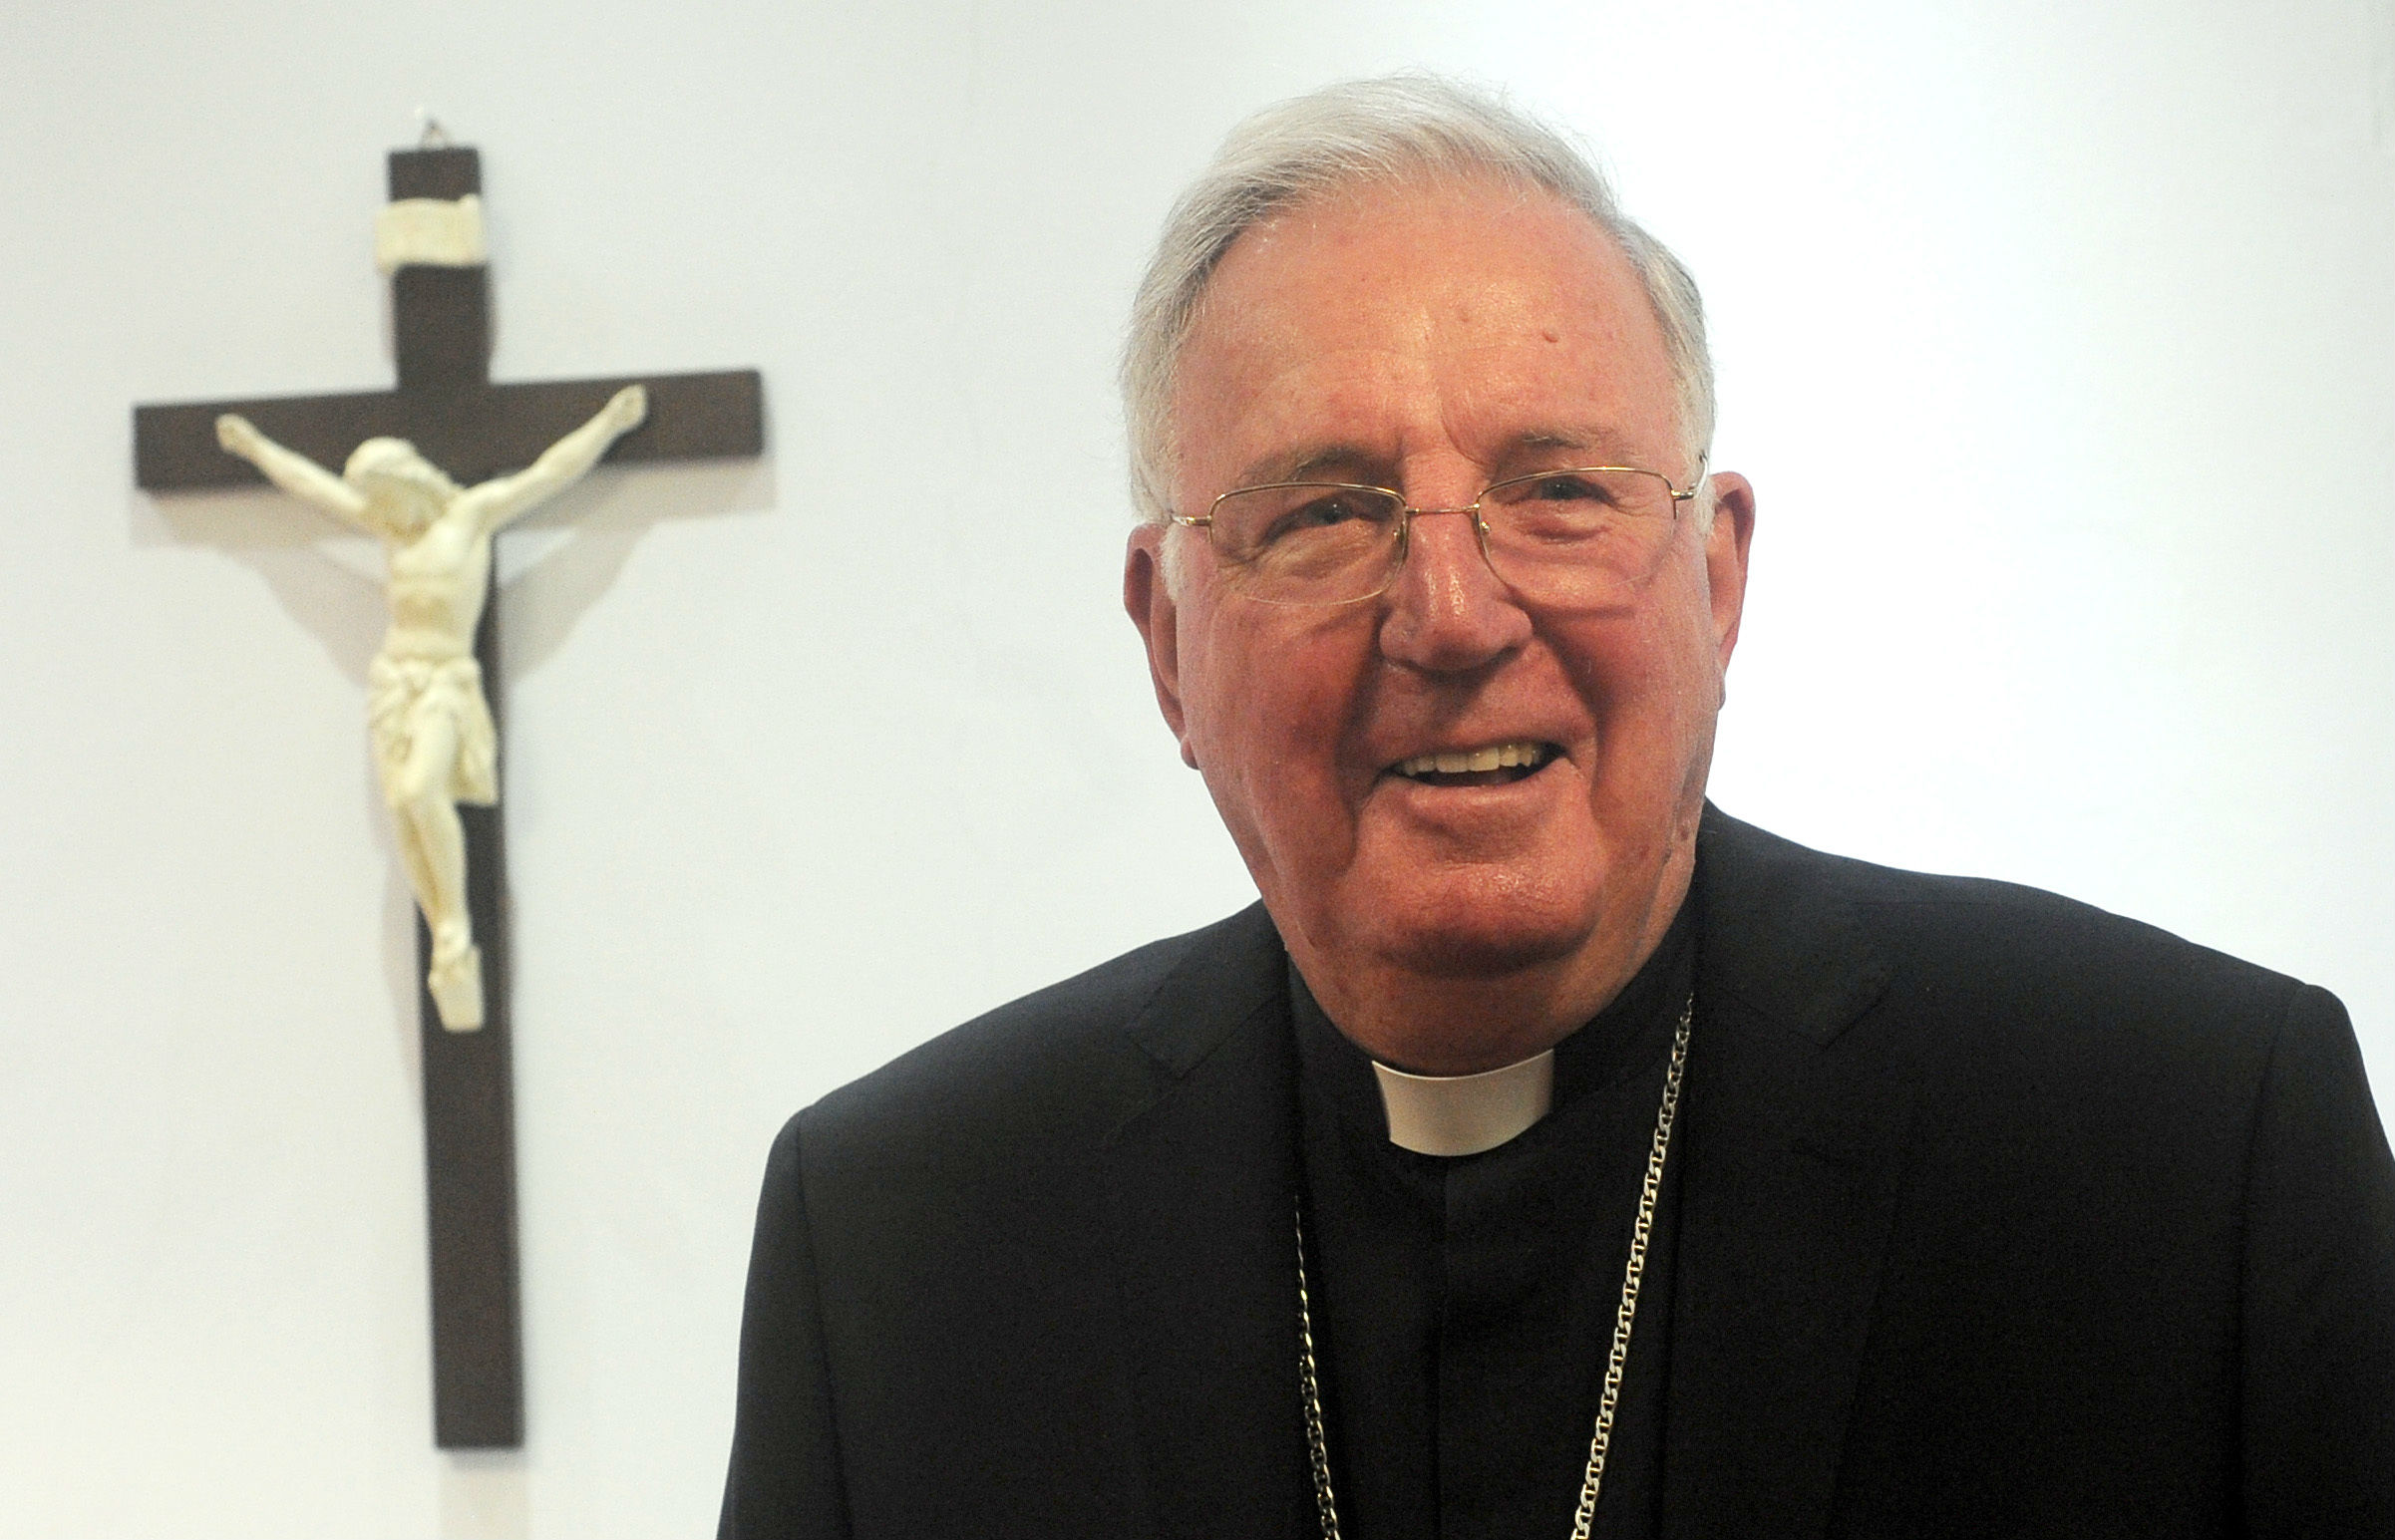 Former Archbishop of Westminster, Cardinal Murphy-O’Connor, seriously ill in hospital